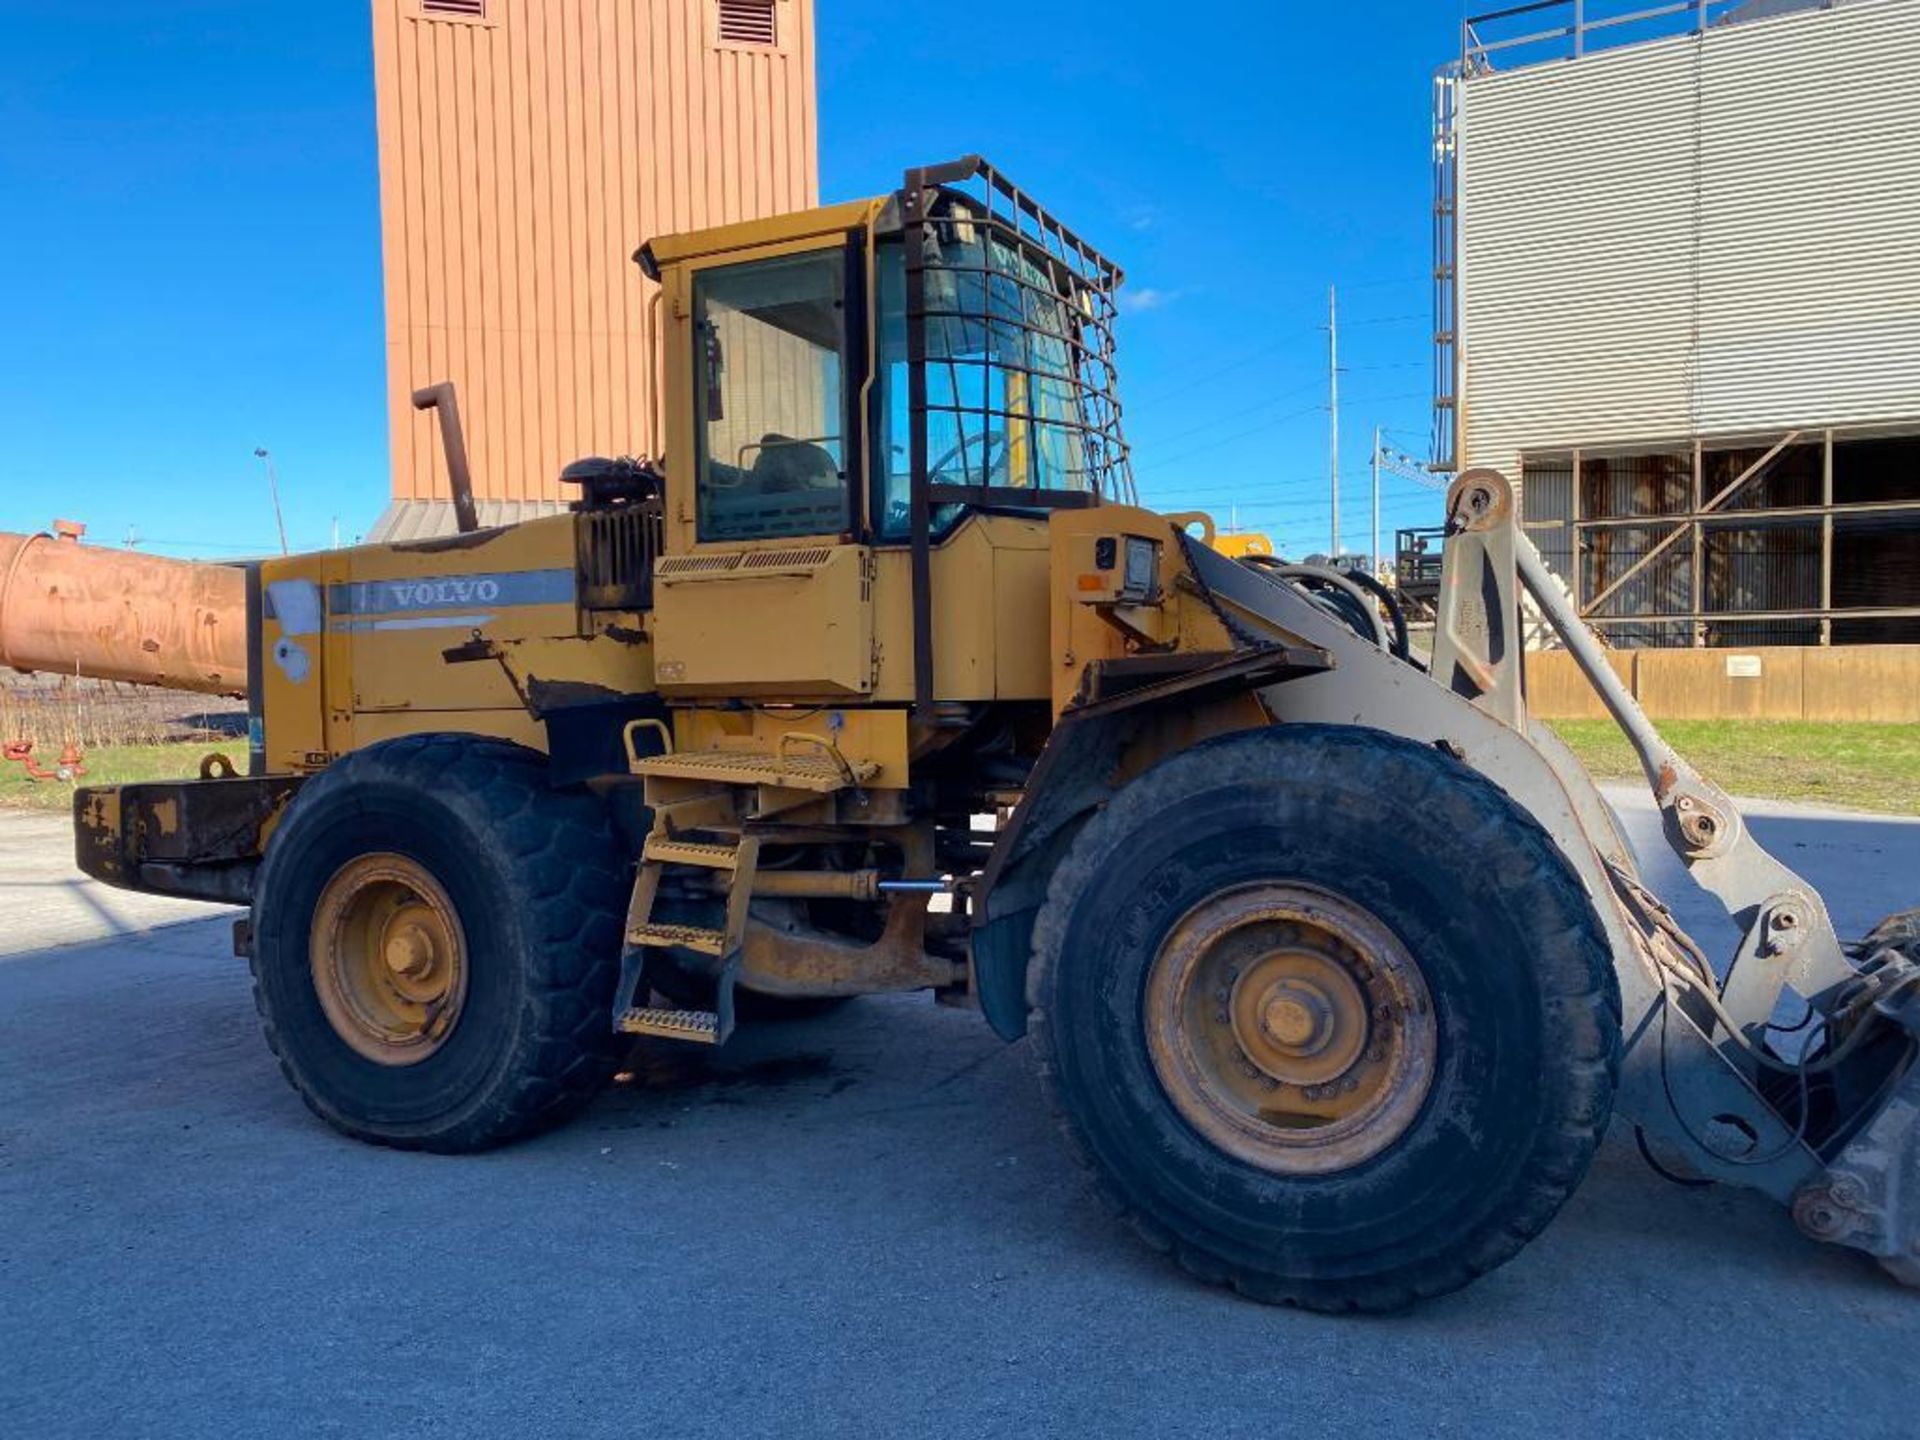 Volvo L120C Wheel Loader, Pin No. L120CV61861, 47,154 Hours, w/ Street Sweeper Attachment - Image 12 of 16